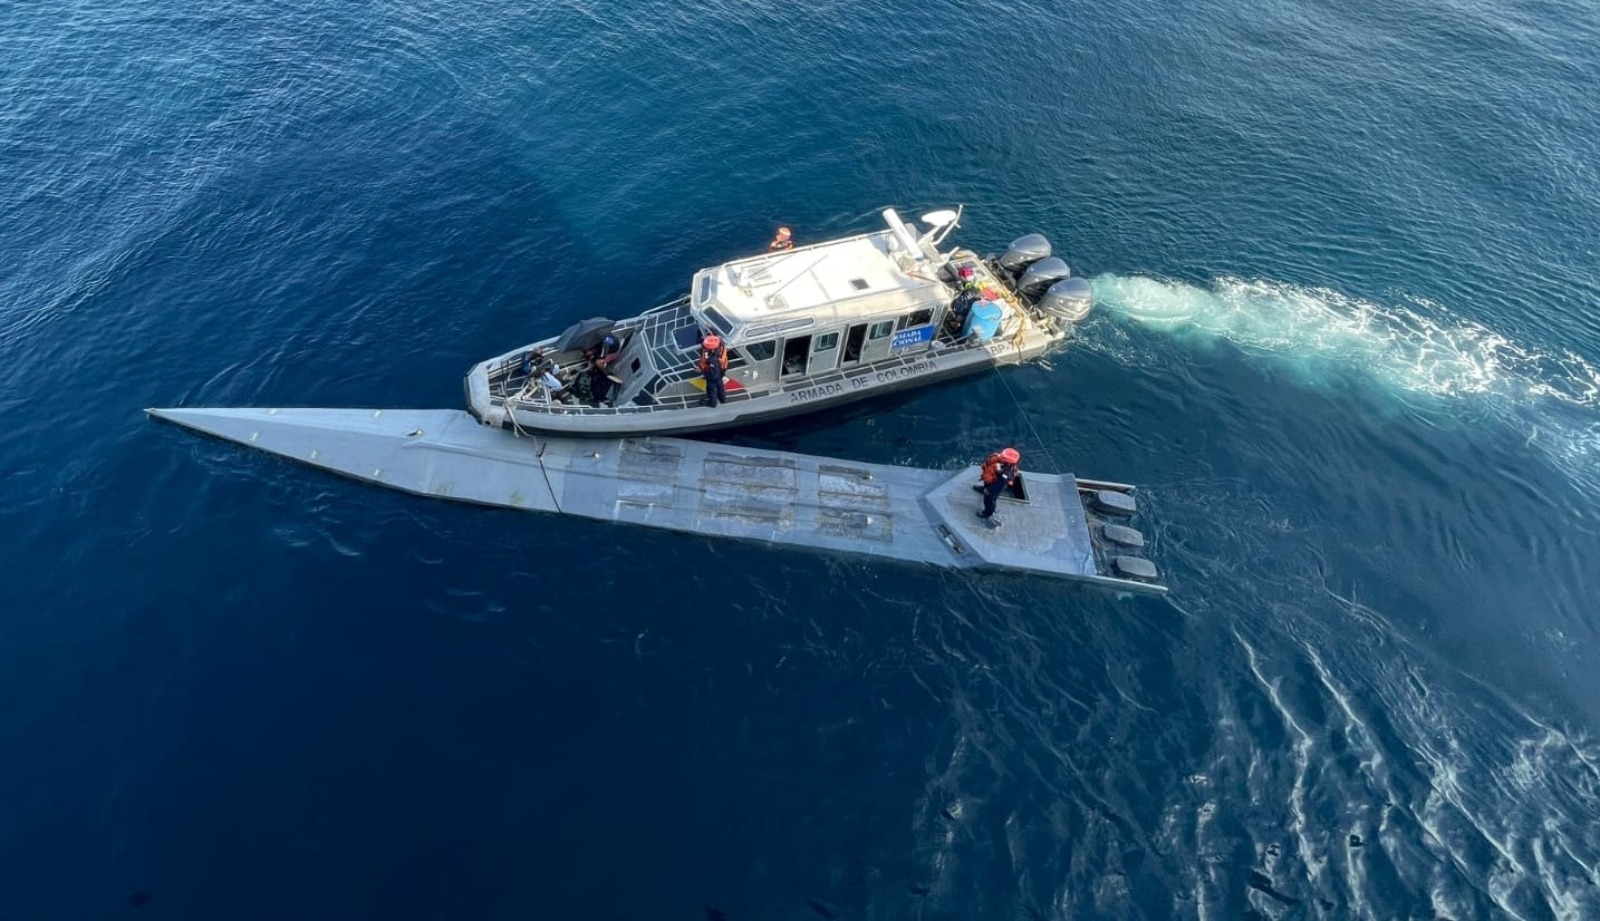 A Homemade Submarine Was Found Carrying 2 Tons of Cocaine and 2 Dead Bodies